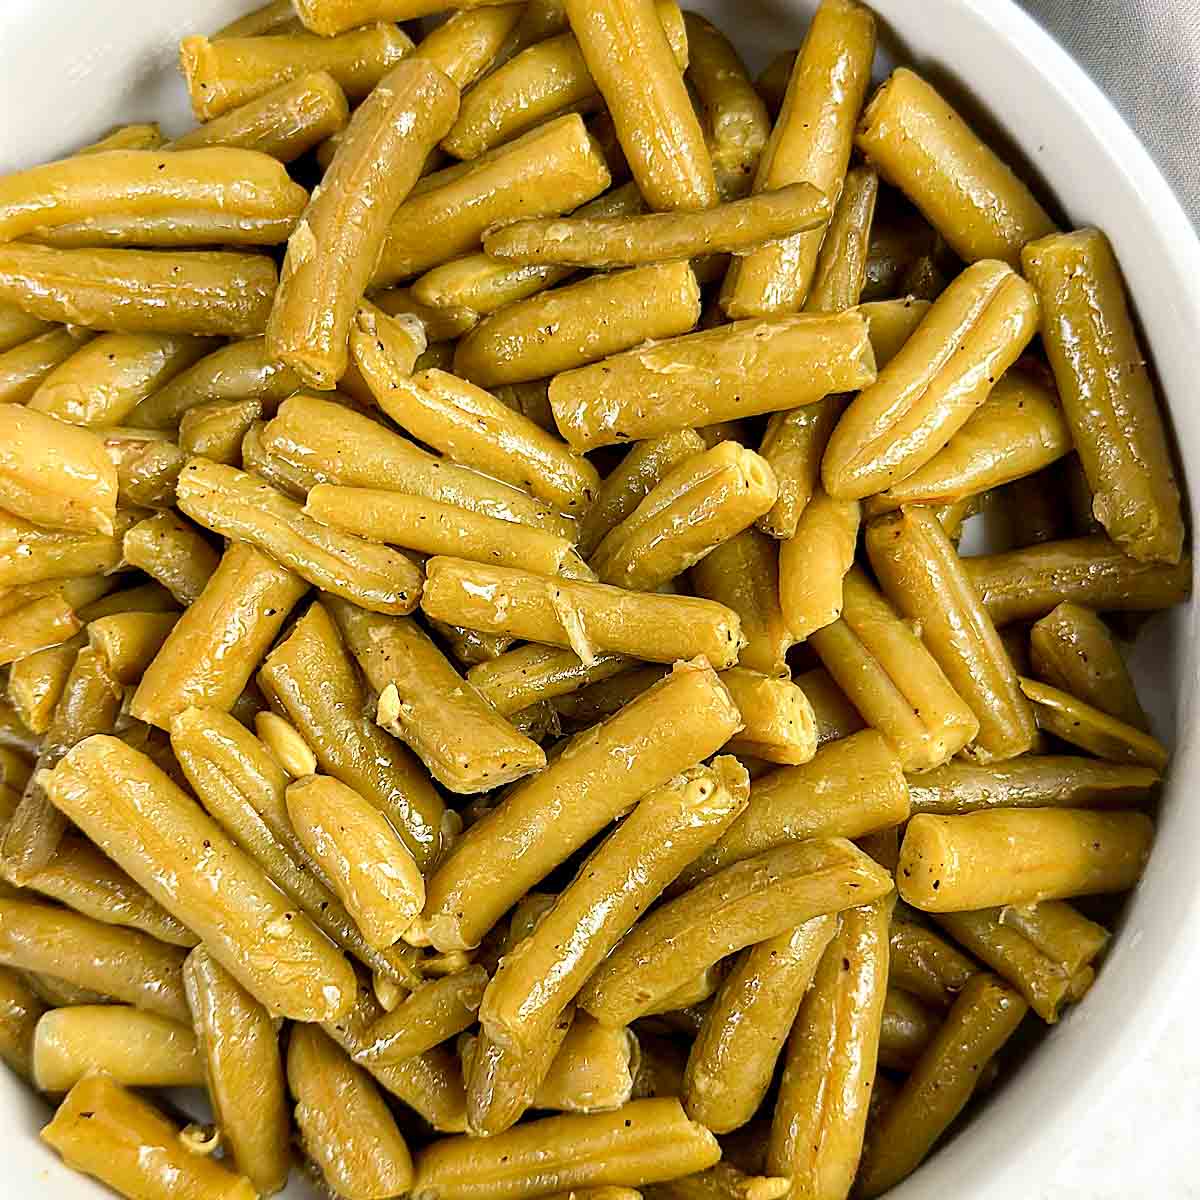 Air fryer canned green beans